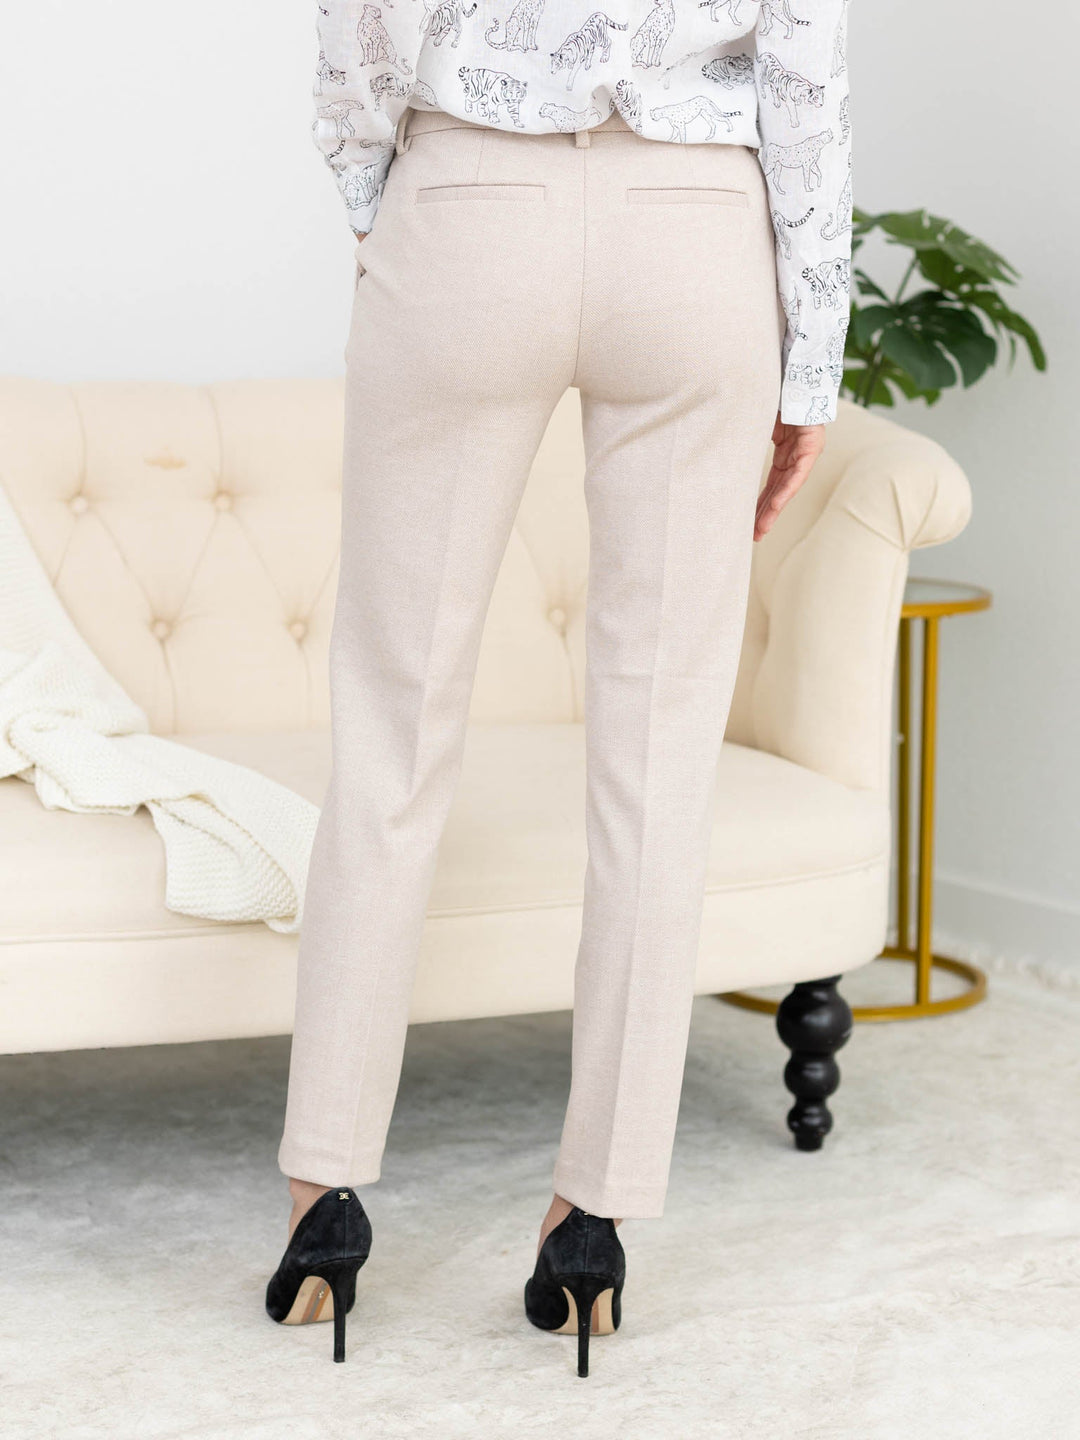 Liverpool-Liverpool Kelsey Trouser - Stone/Tan - Leela and Lavender